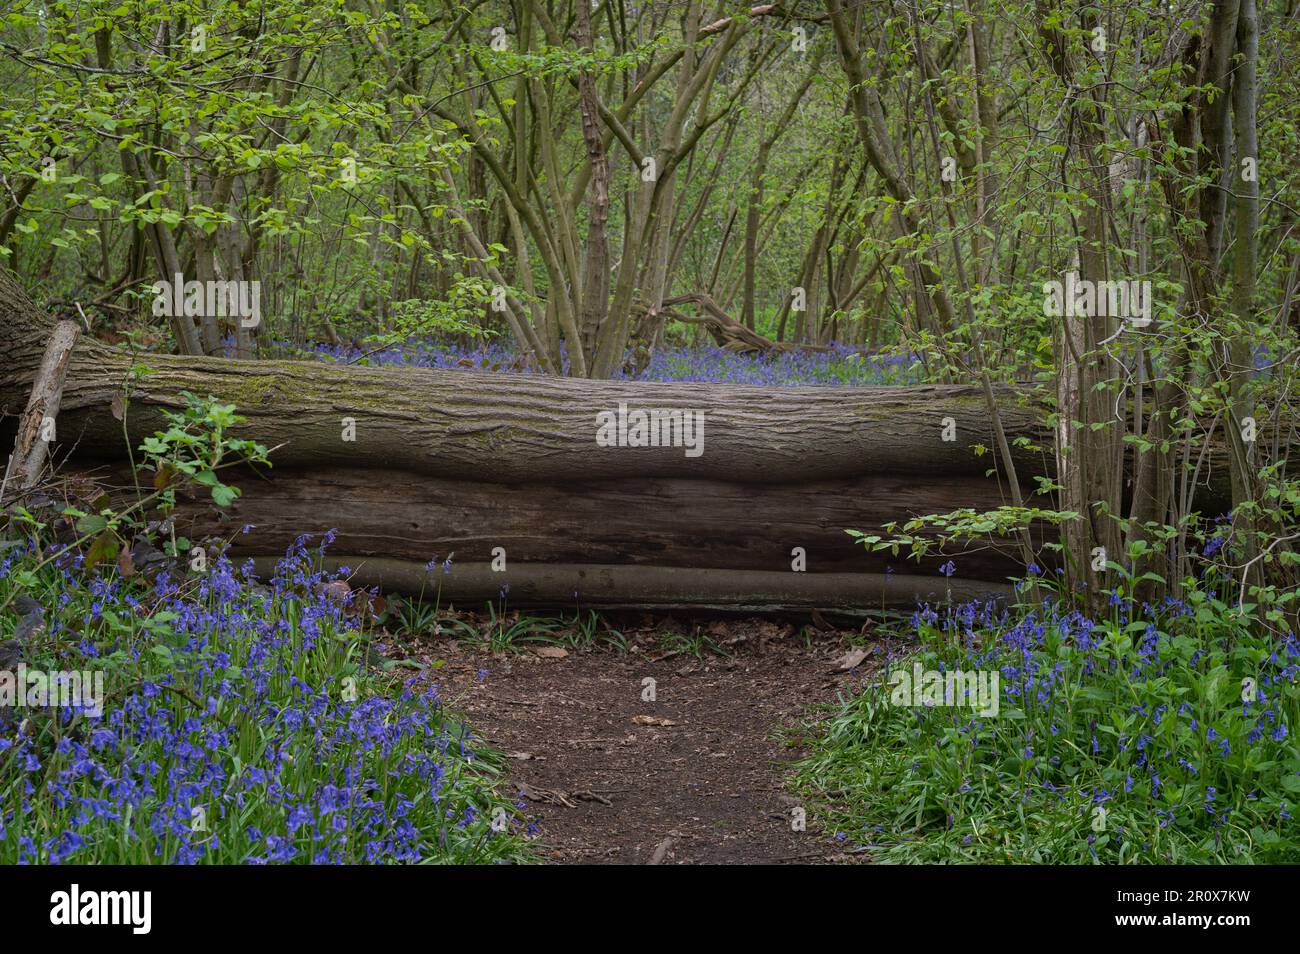 Bulebells in Hillhouse woods in West Bergholt, Essex. Blue, purple flowers, green trees, spring mood. Stock Photo